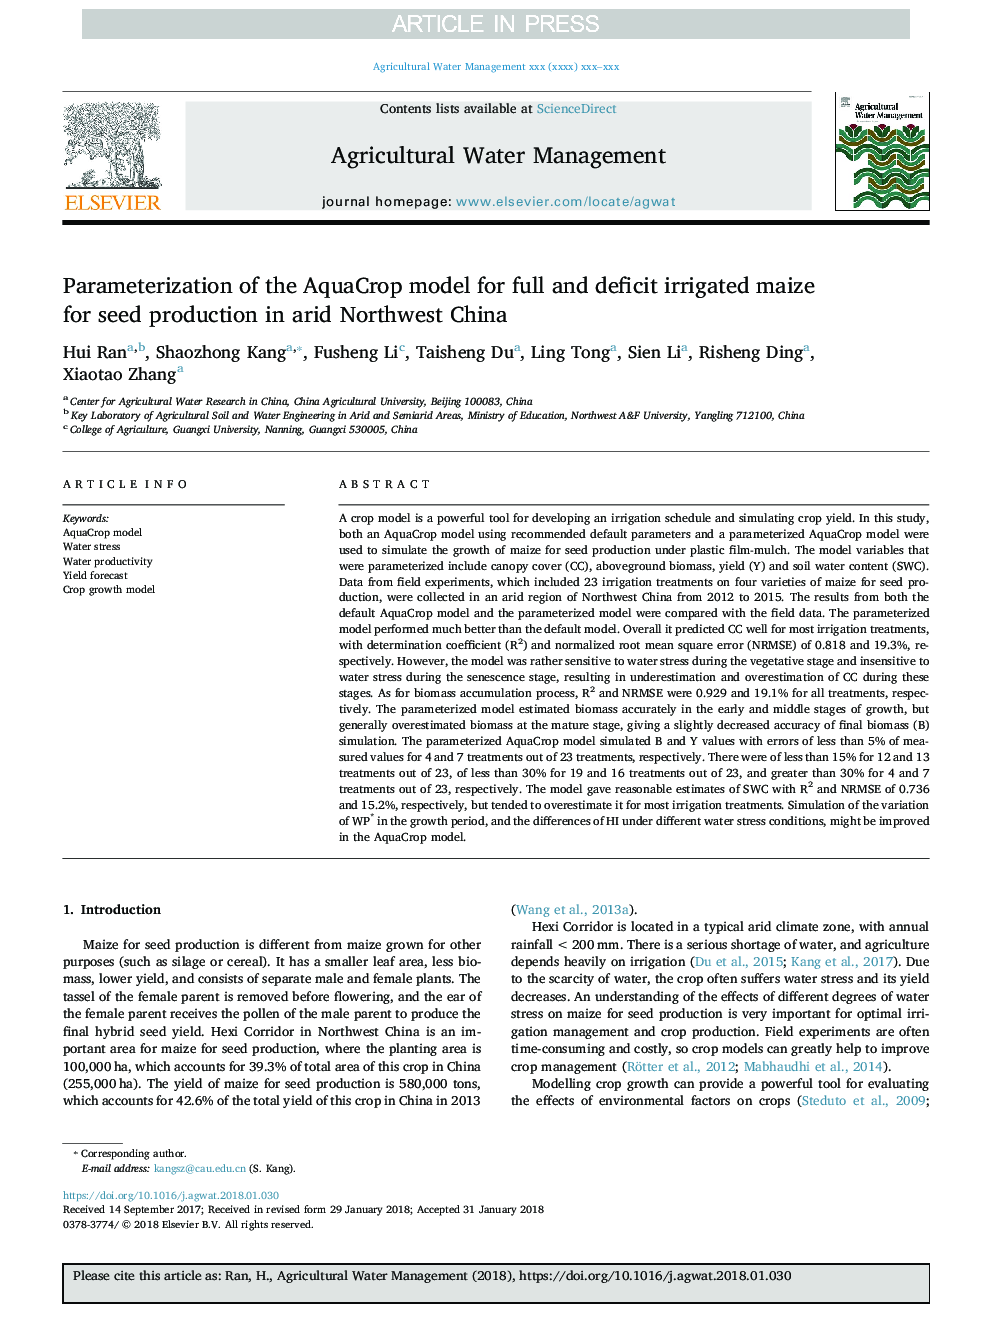 Parameterization of the AquaCrop model for full and deficit irrigated maize for seed production in arid Northwest China